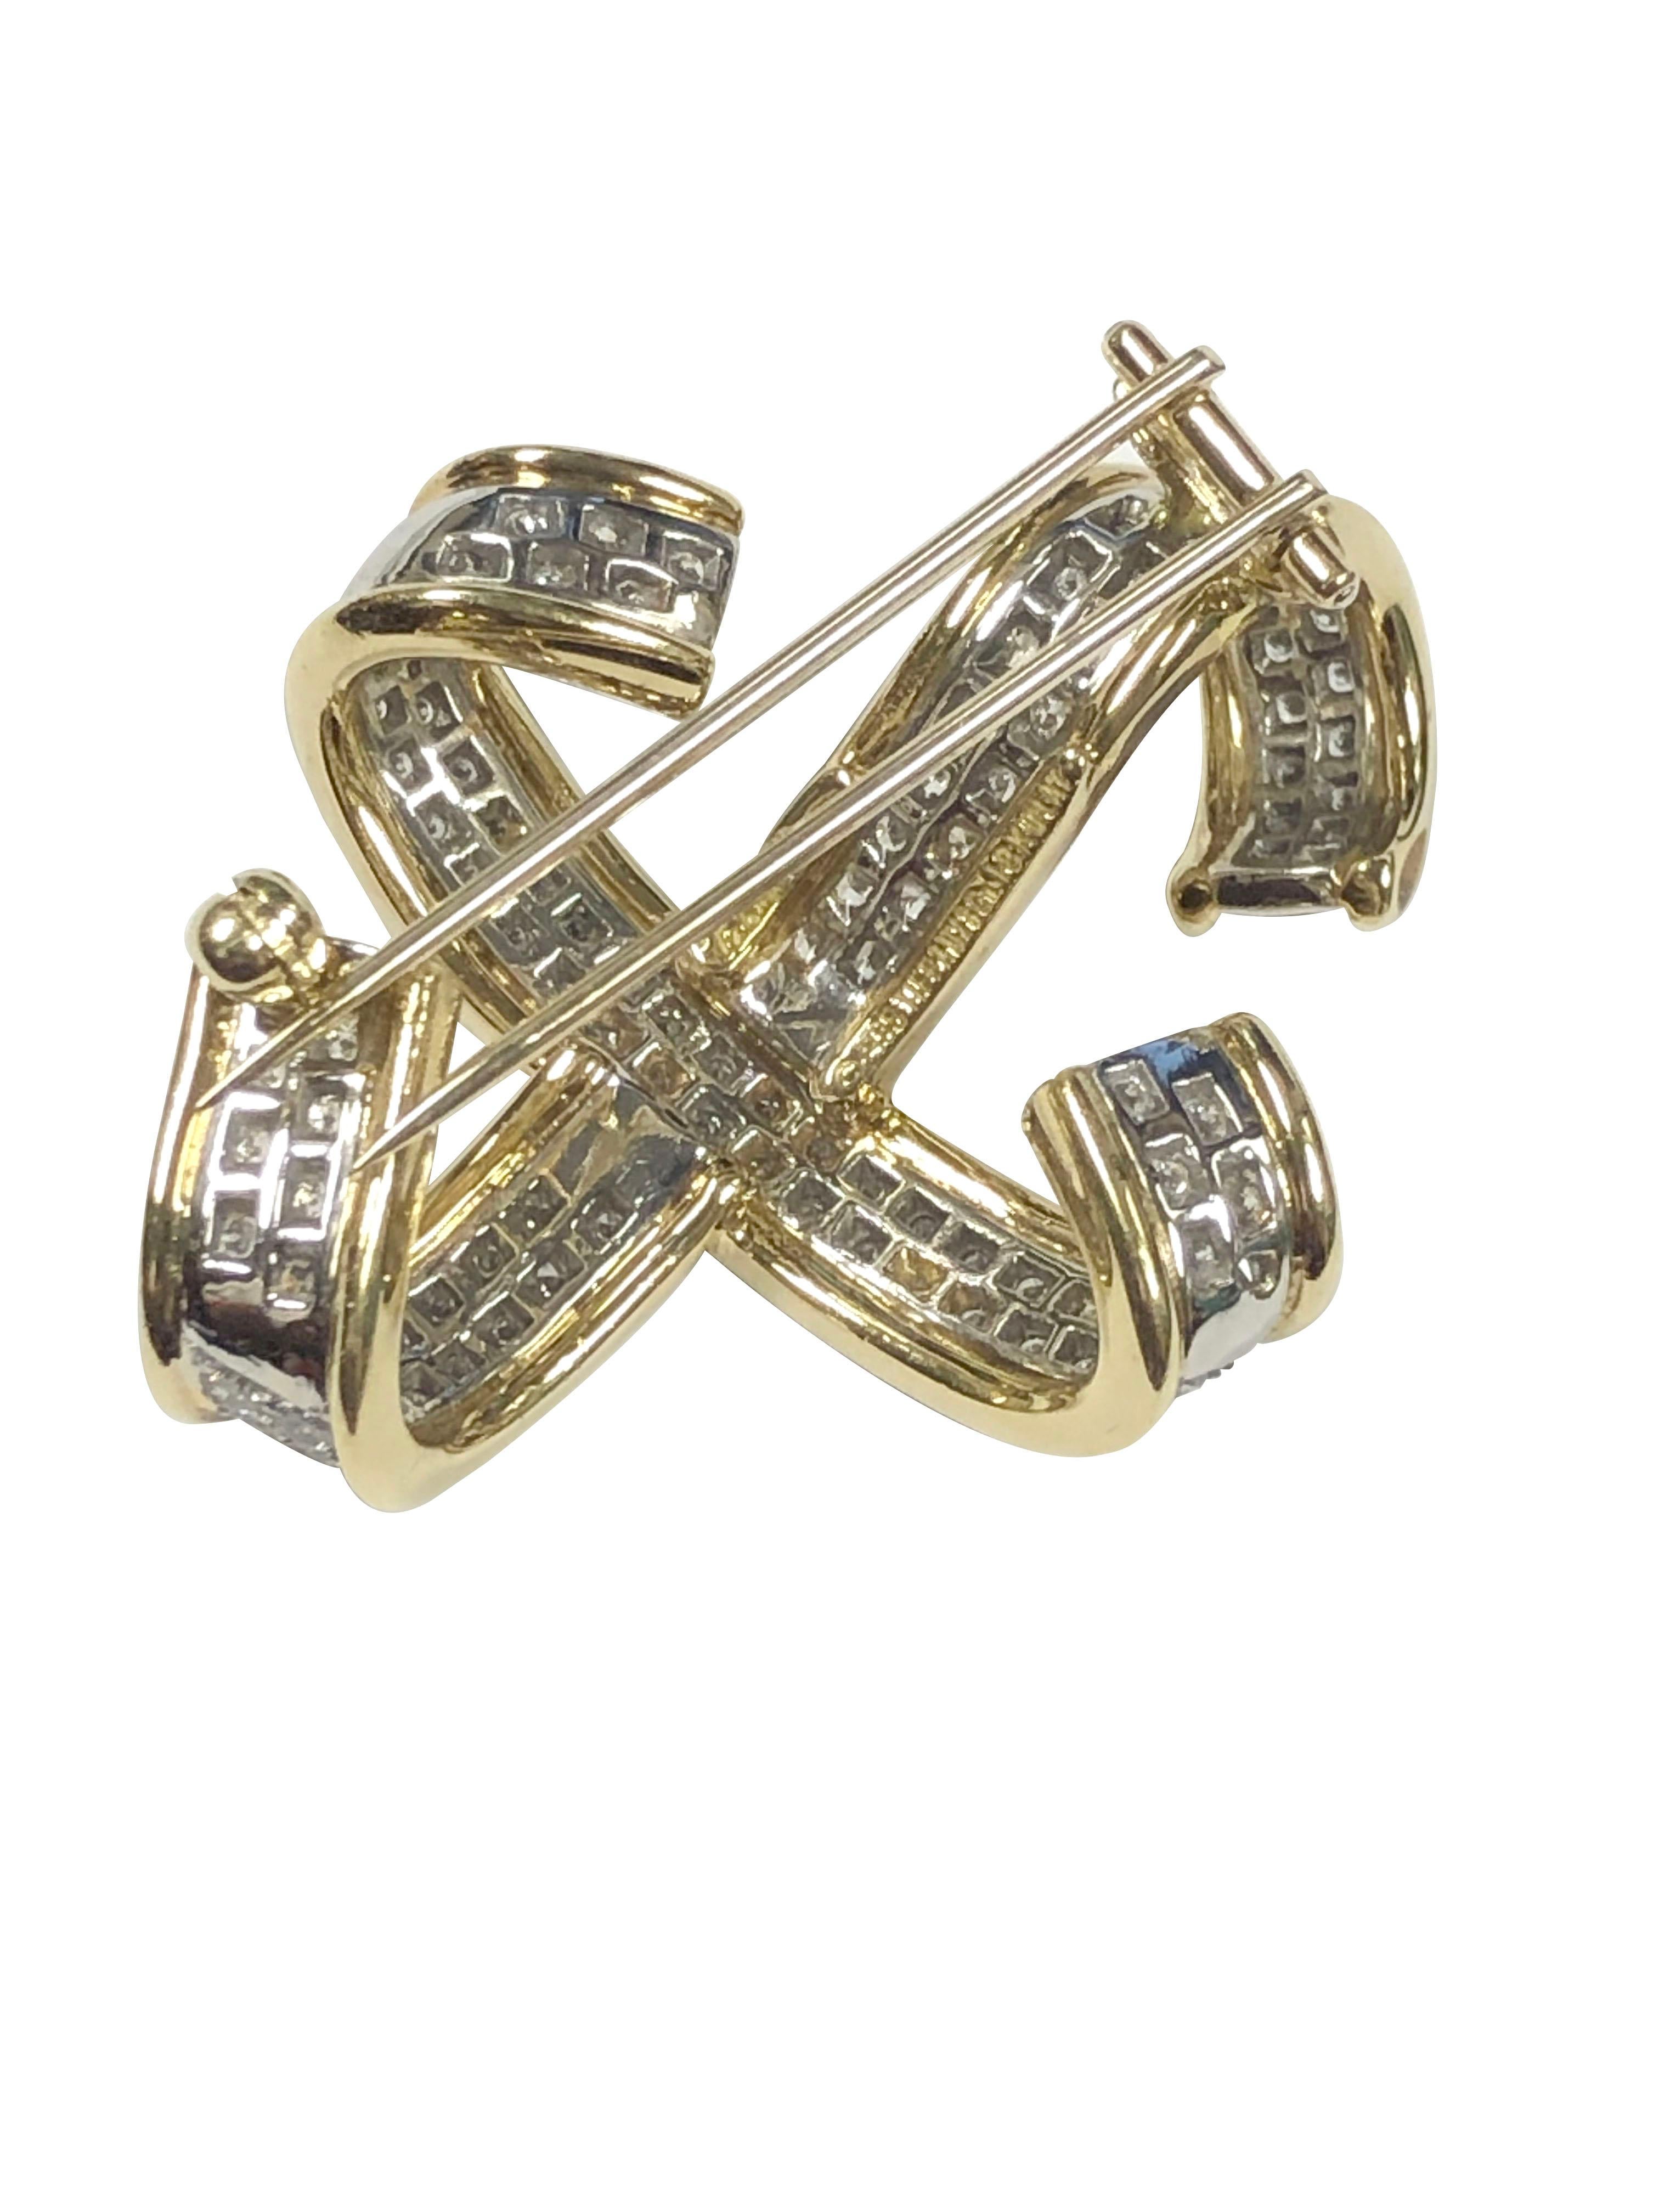 Circa 1989 Paloma Picasso for Tiffany & Company 18k Yellow Gold X brooch. Measuring 1 1/2 inches in length X 1 inch, having a double clip pin fastener, set with 2 Carats of Fine White Round Brilliant cut Diamonds.